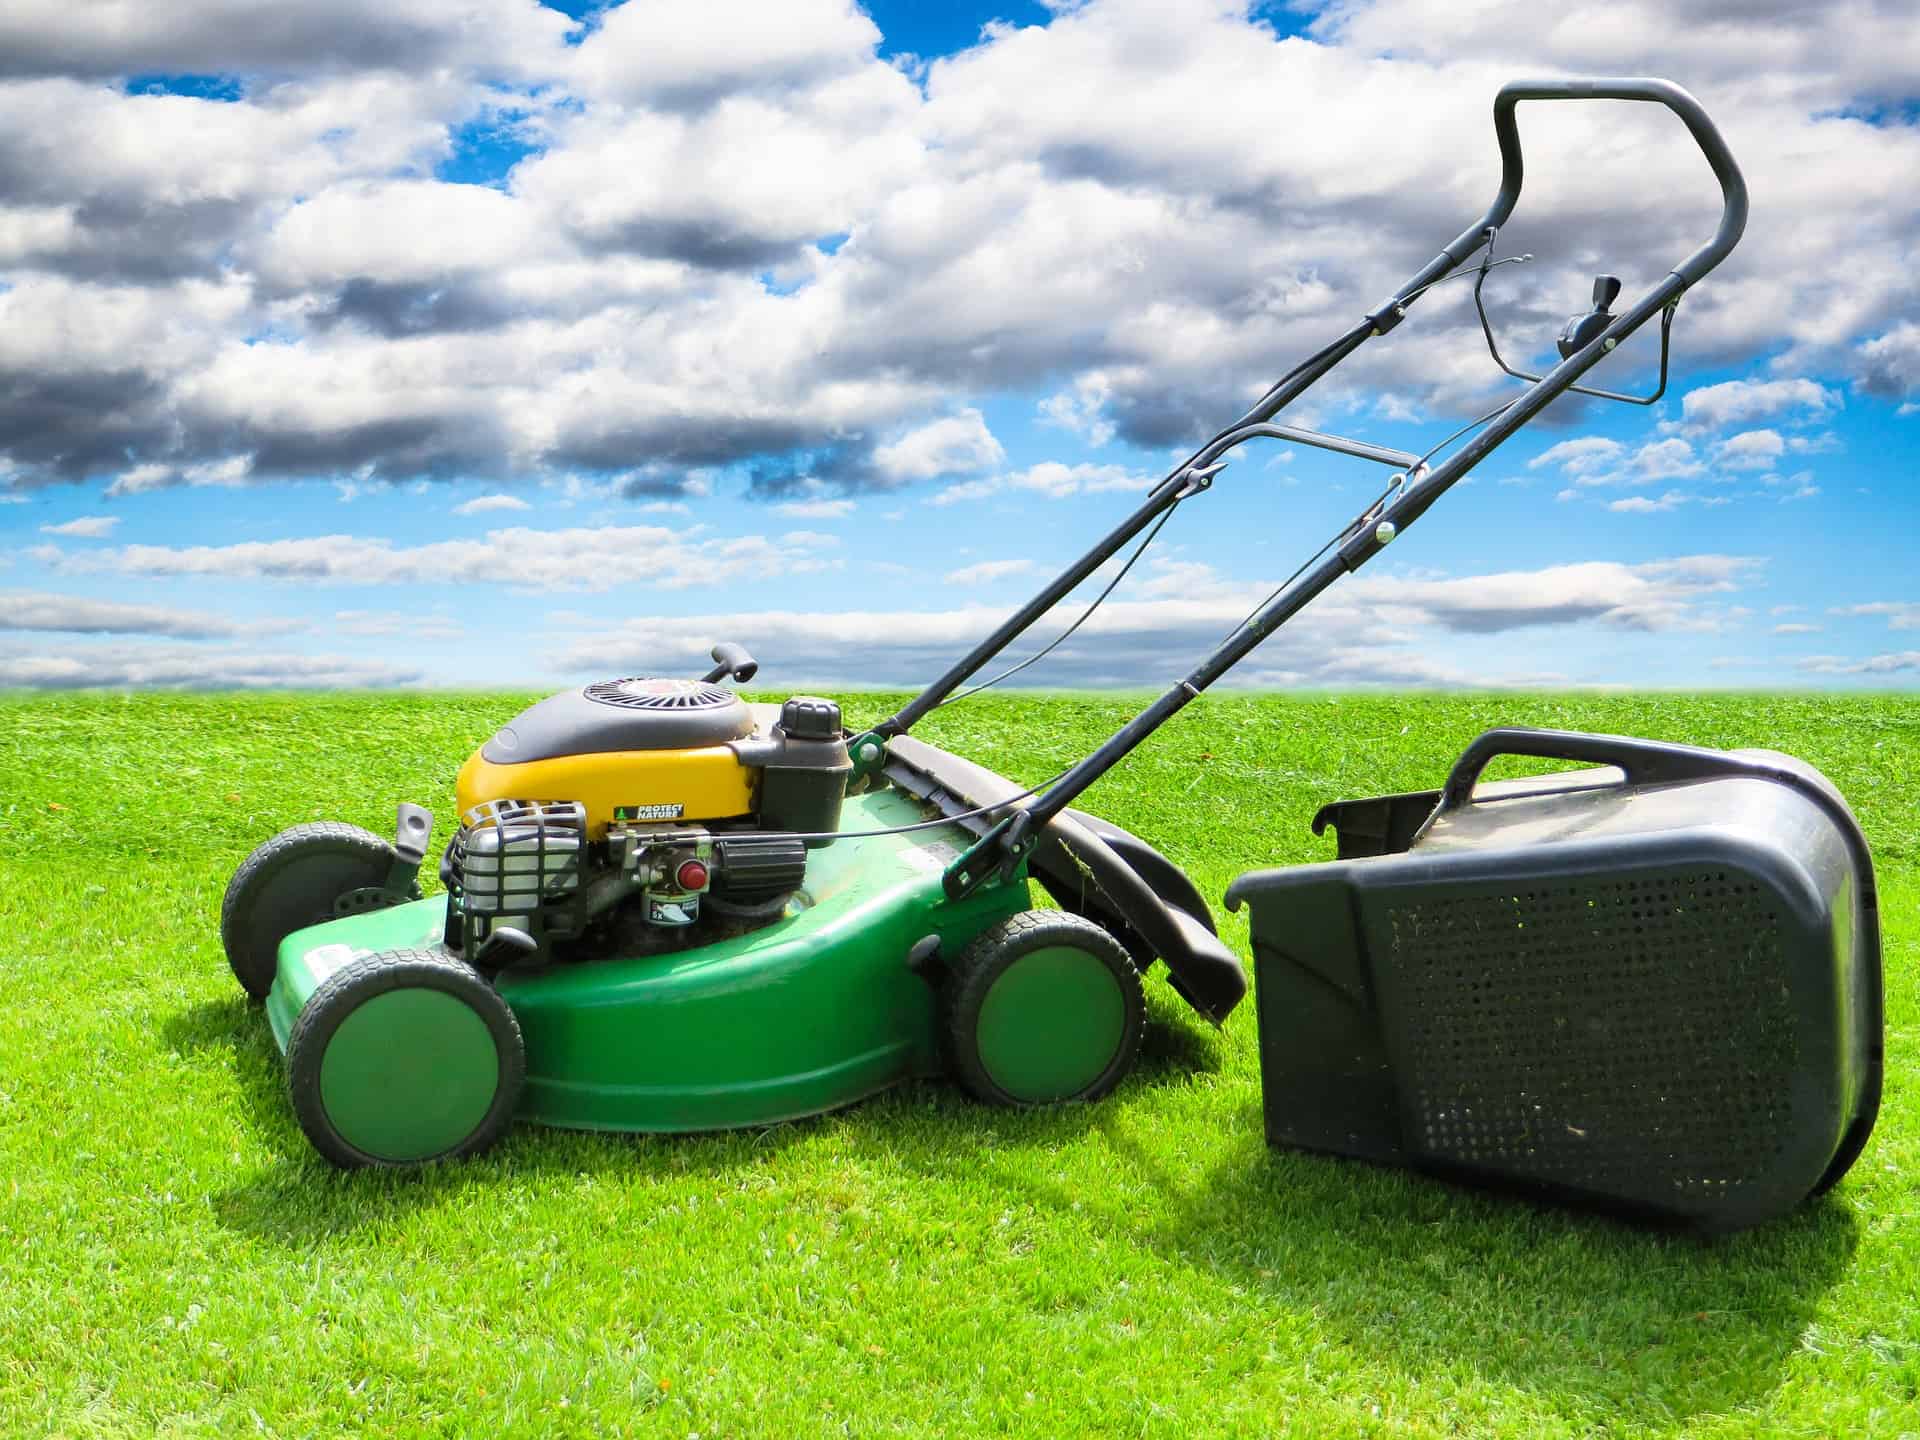 How To Start A Lawn Mower When You re Weak 4 Tips For Lawn Mowing - Moyer Lawncare & Landscaping